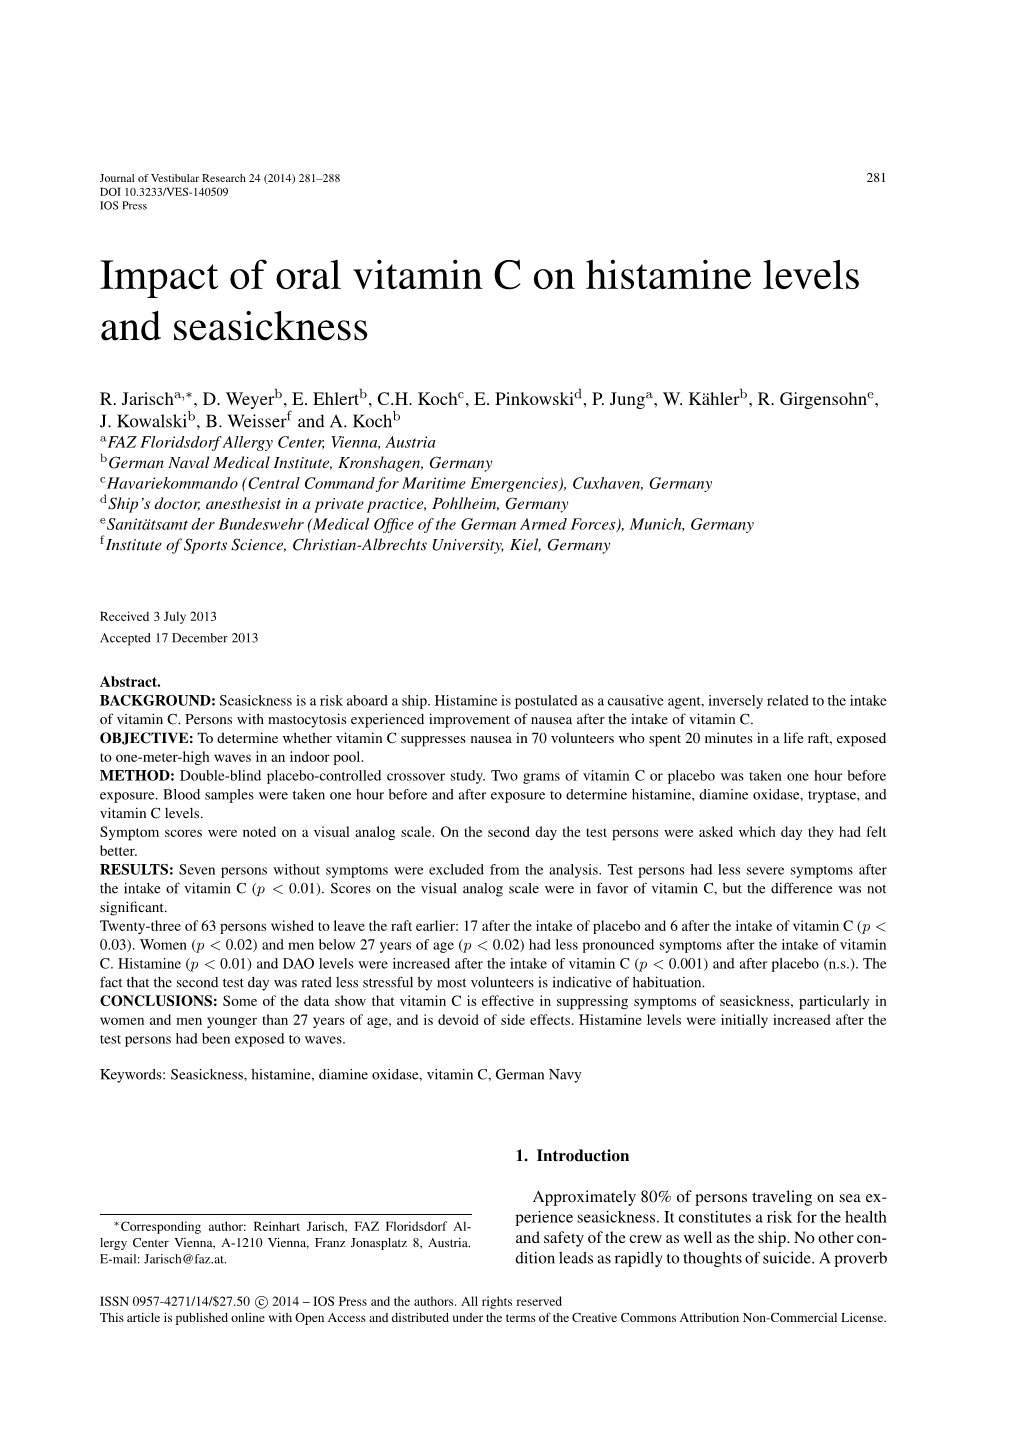 Impact of Oral Vitamin C on Histamine Levels and Seasickness